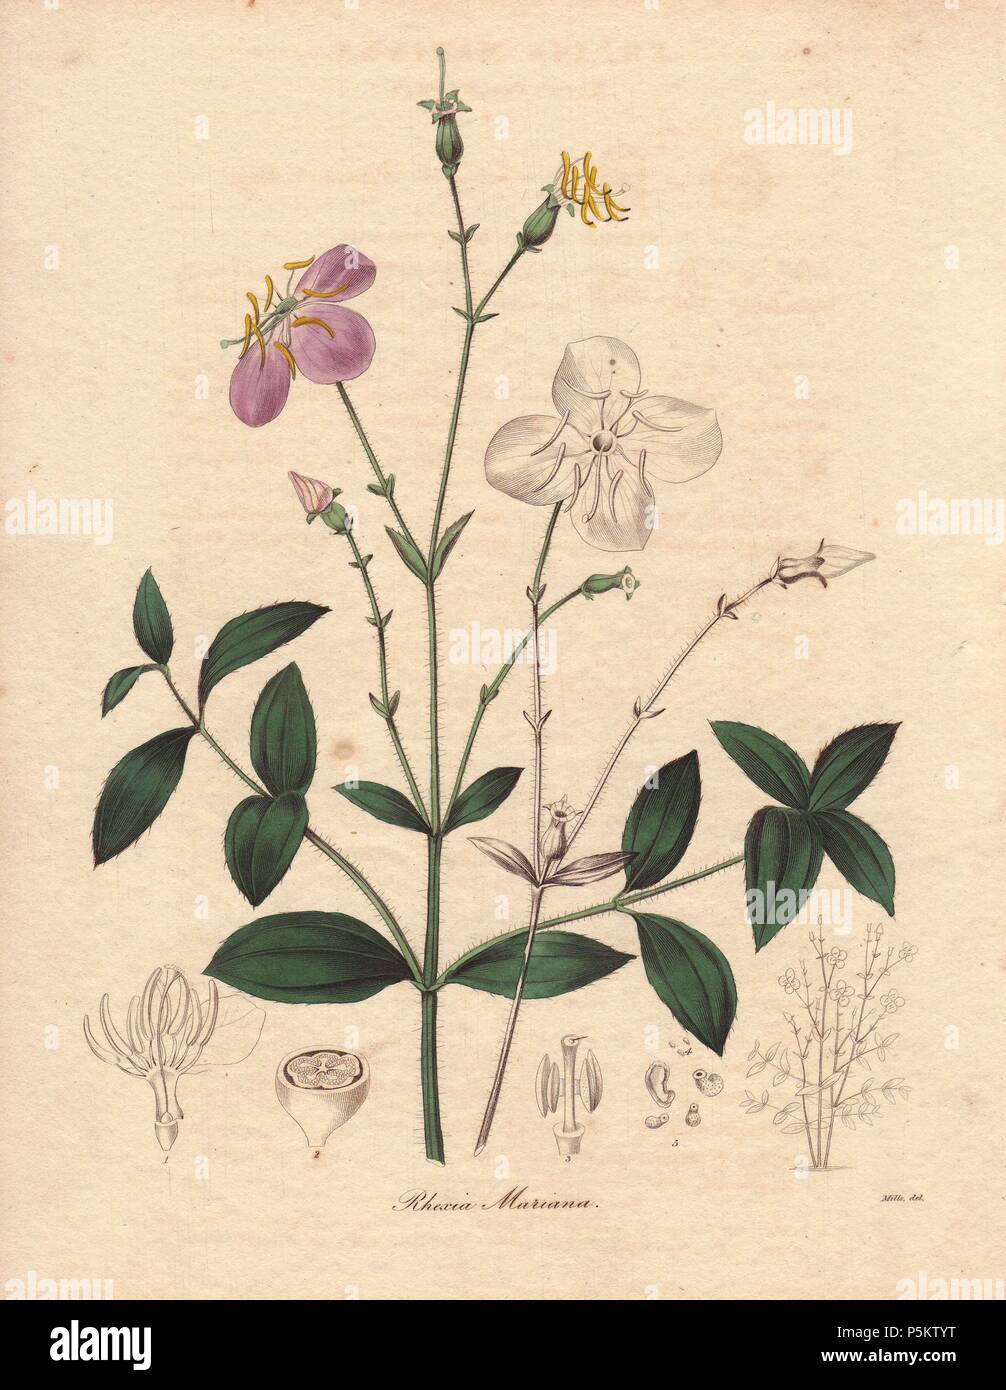 Rhexia mariana. The Maryland meadow-beauty is a native to the United States and Cuba. The pale purple flowers contrast with the orange-yellow stamens. . Miss R. Mills (active 18361842) was also the main illustrator for Knowles and Westcott’s The Floral Cabinet (1837-1842). . Benjamin Maund's The Botanist was a five-volume series that introduced 250 new plants from 1836 to 1842. The series is notable for its many female artists: the plates were drawn by Maund's daughters Sarah and Eliza, Augusta Withers, Priscilla Bury, Jane Taylor, Miss R. Mills among others. The other characteristic is parti Stock Photo